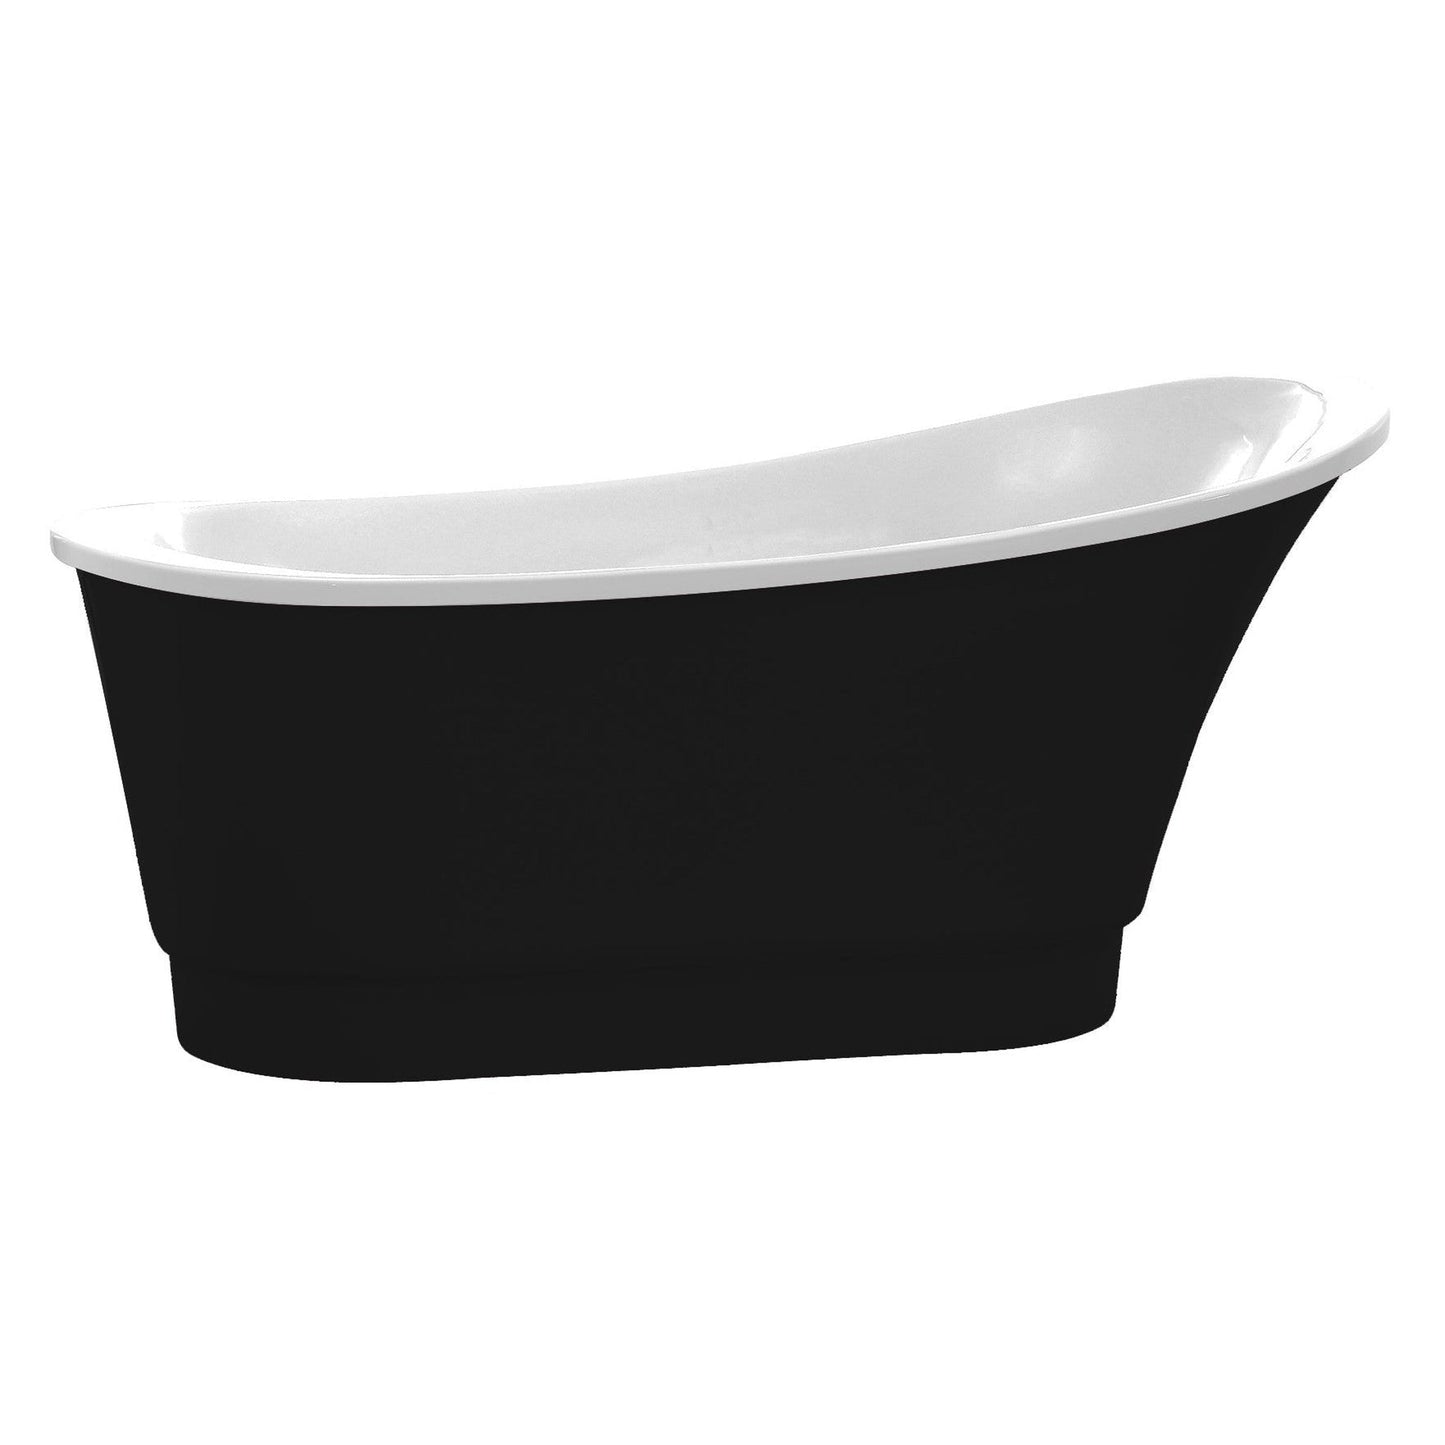 ANZZI Prima Series 67" x 31" Glossy Black Freestanding Bathtub With Built-In Overflow and Pop-Up Drain